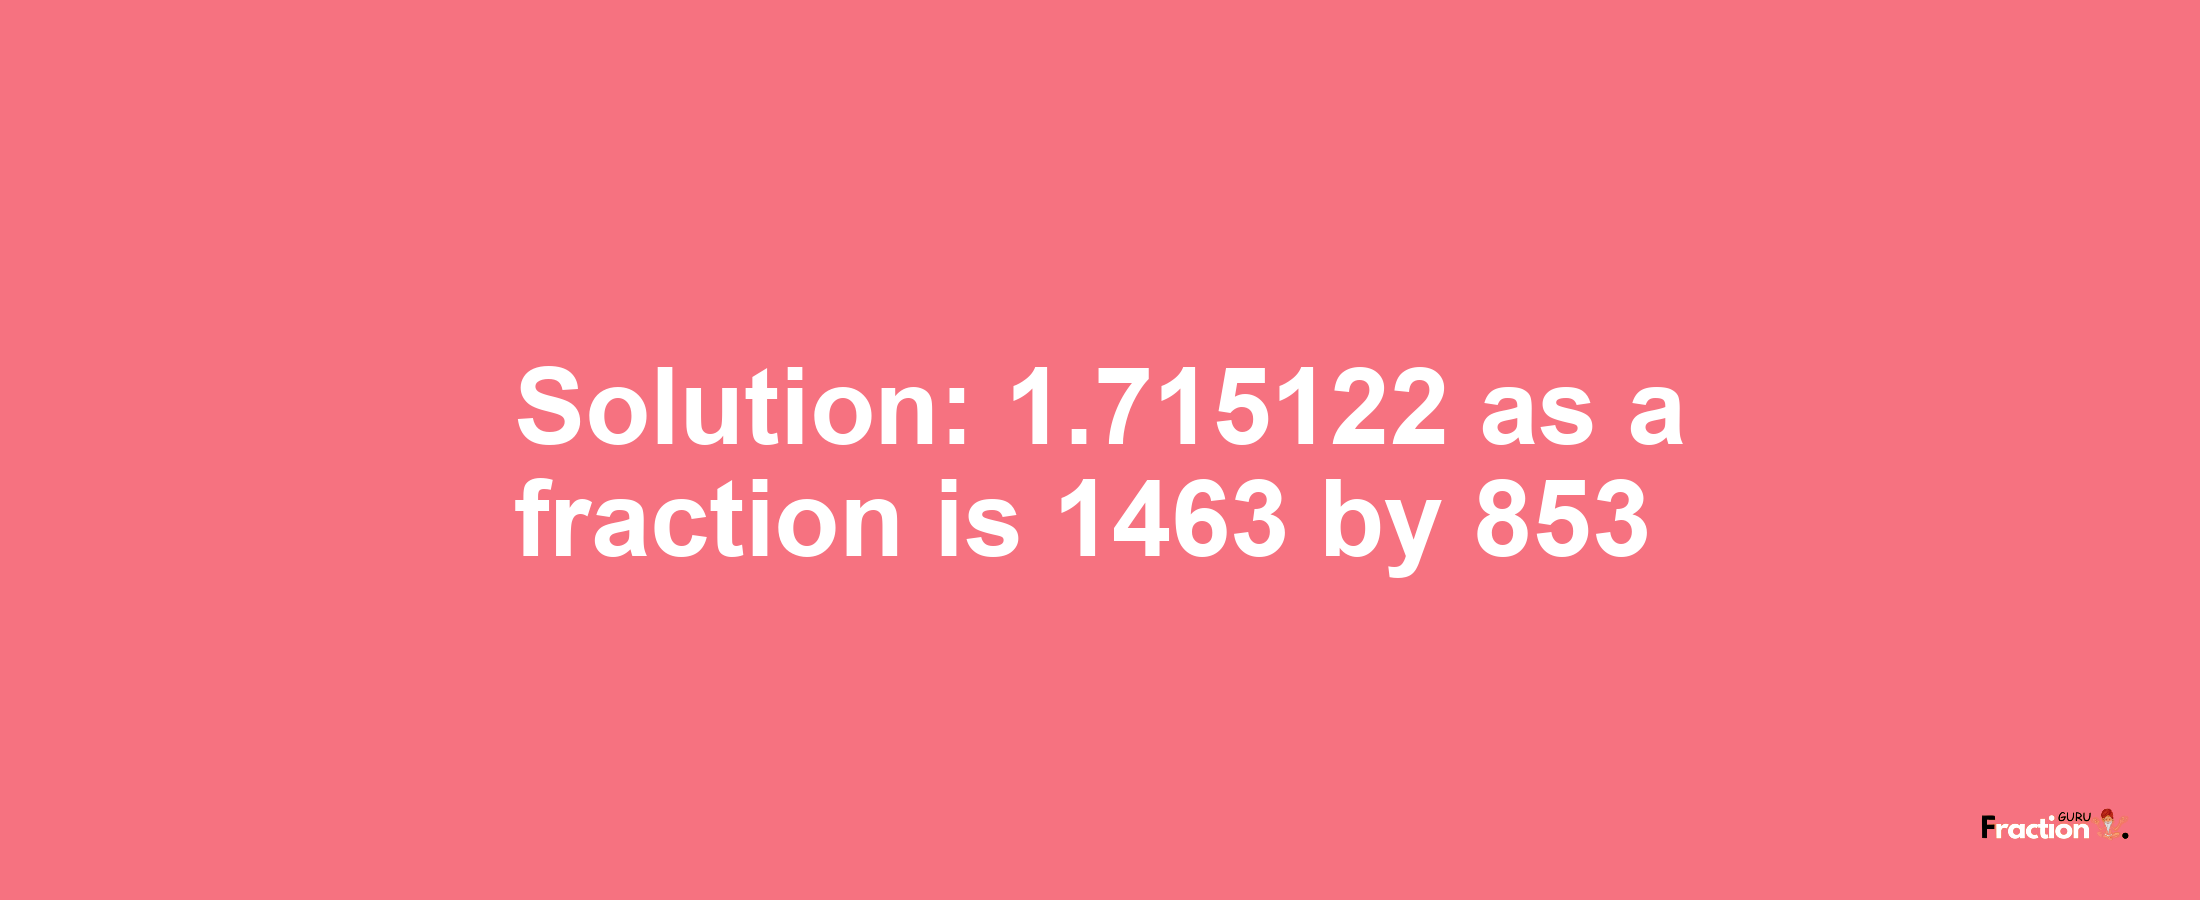 Solution:1.715122 as a fraction is 1463/853